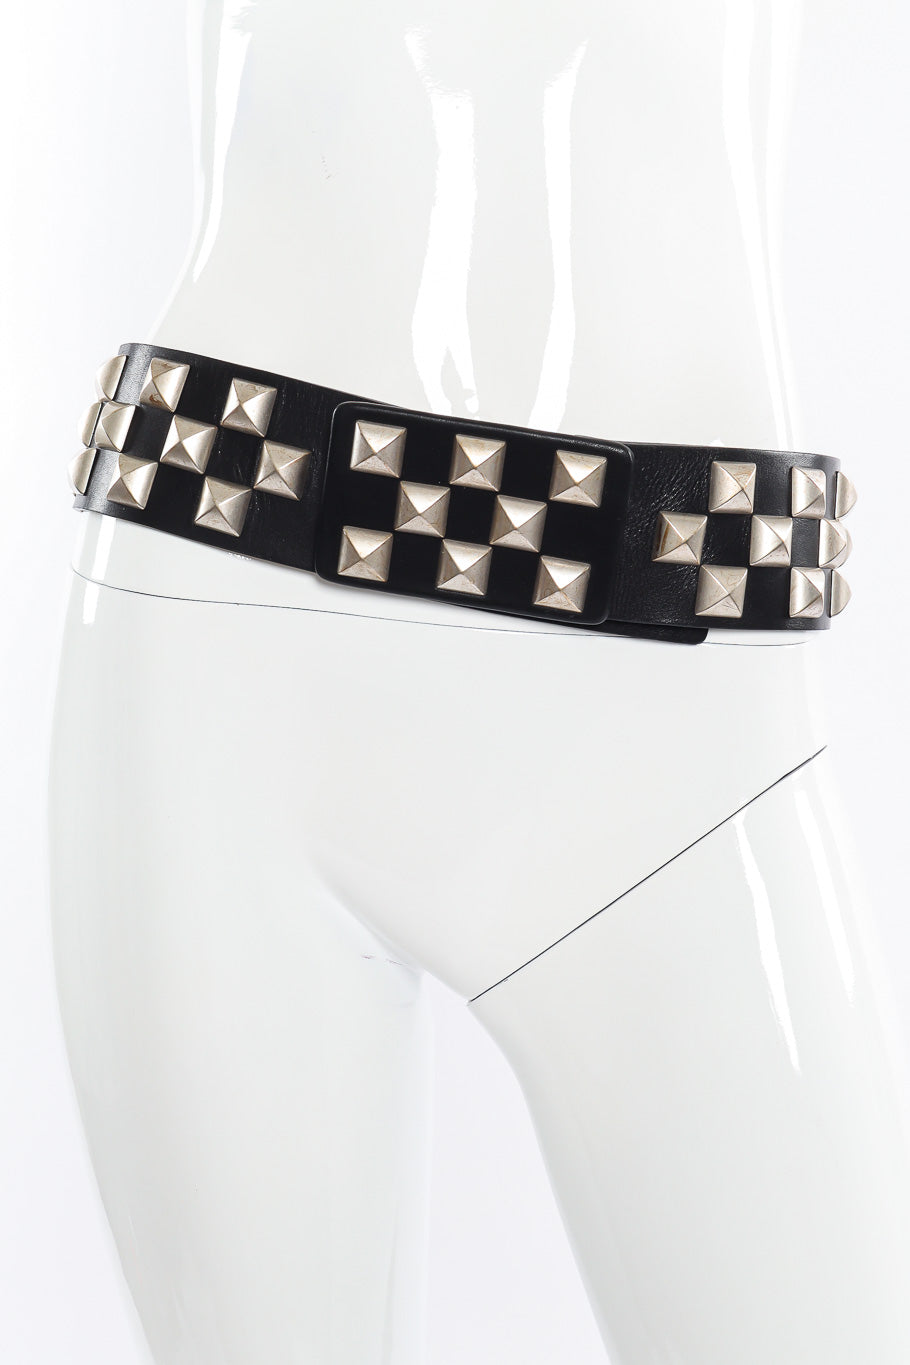 Studded leather statement belt by Streets Ahead on mannequin @recessla